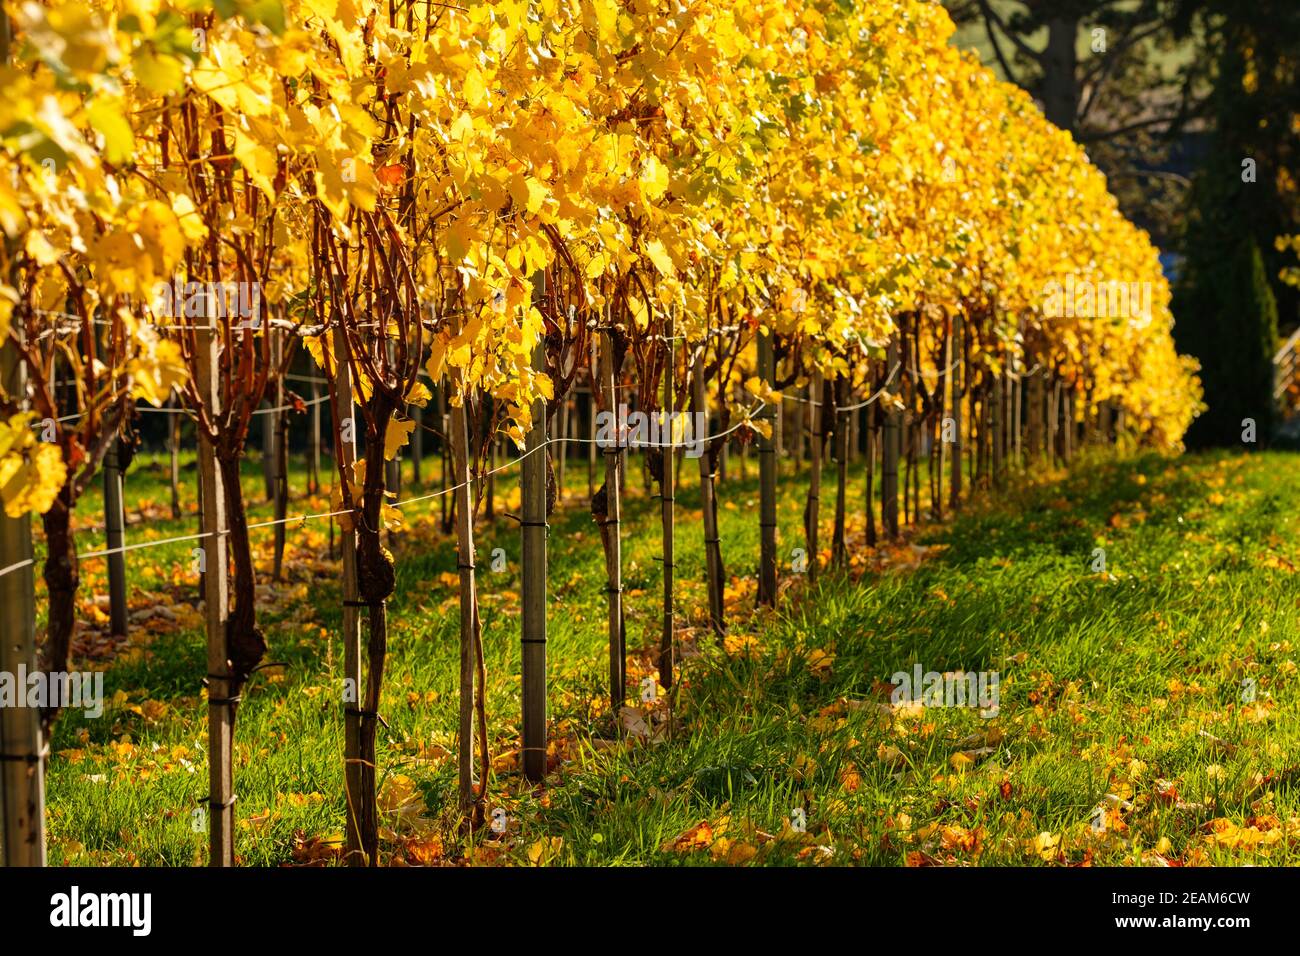 Yellow autumn colours of vines in a vineyard Stock Photo